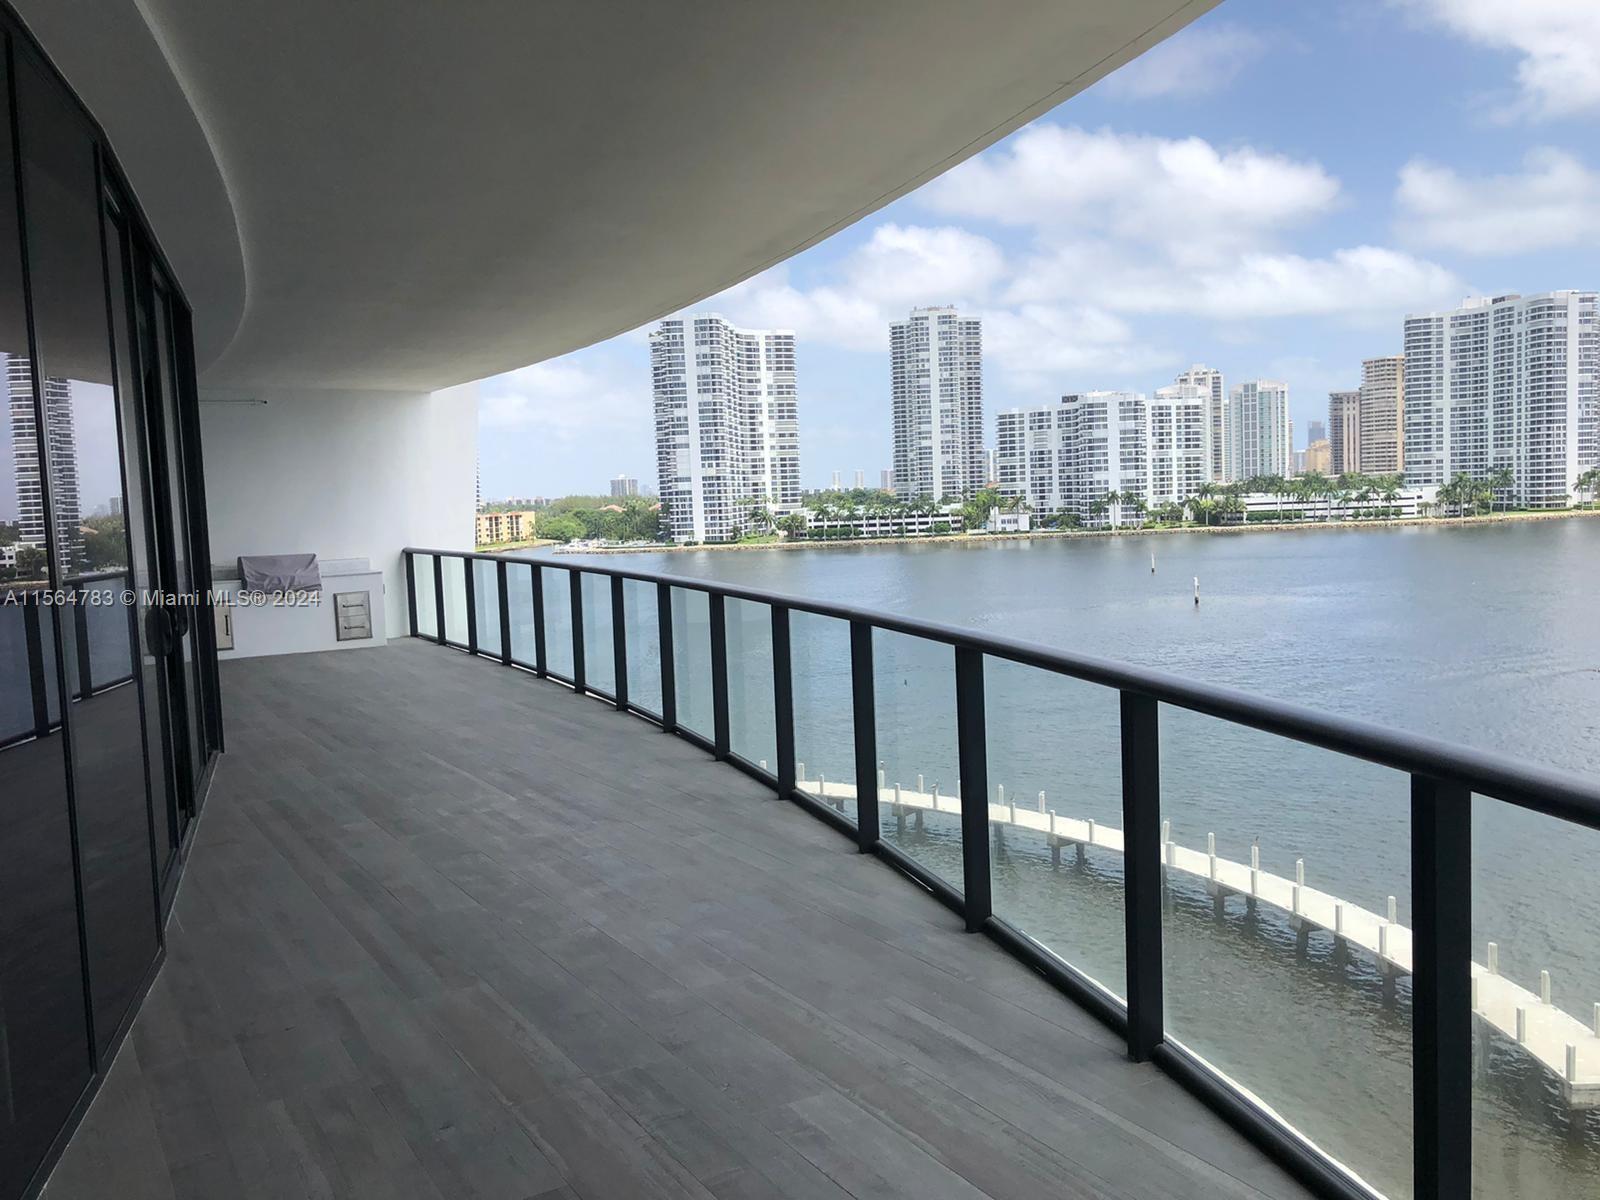 Private Island exclusive life style. Unparalleled to any other property in Miami. Large 2 bedroom/2 